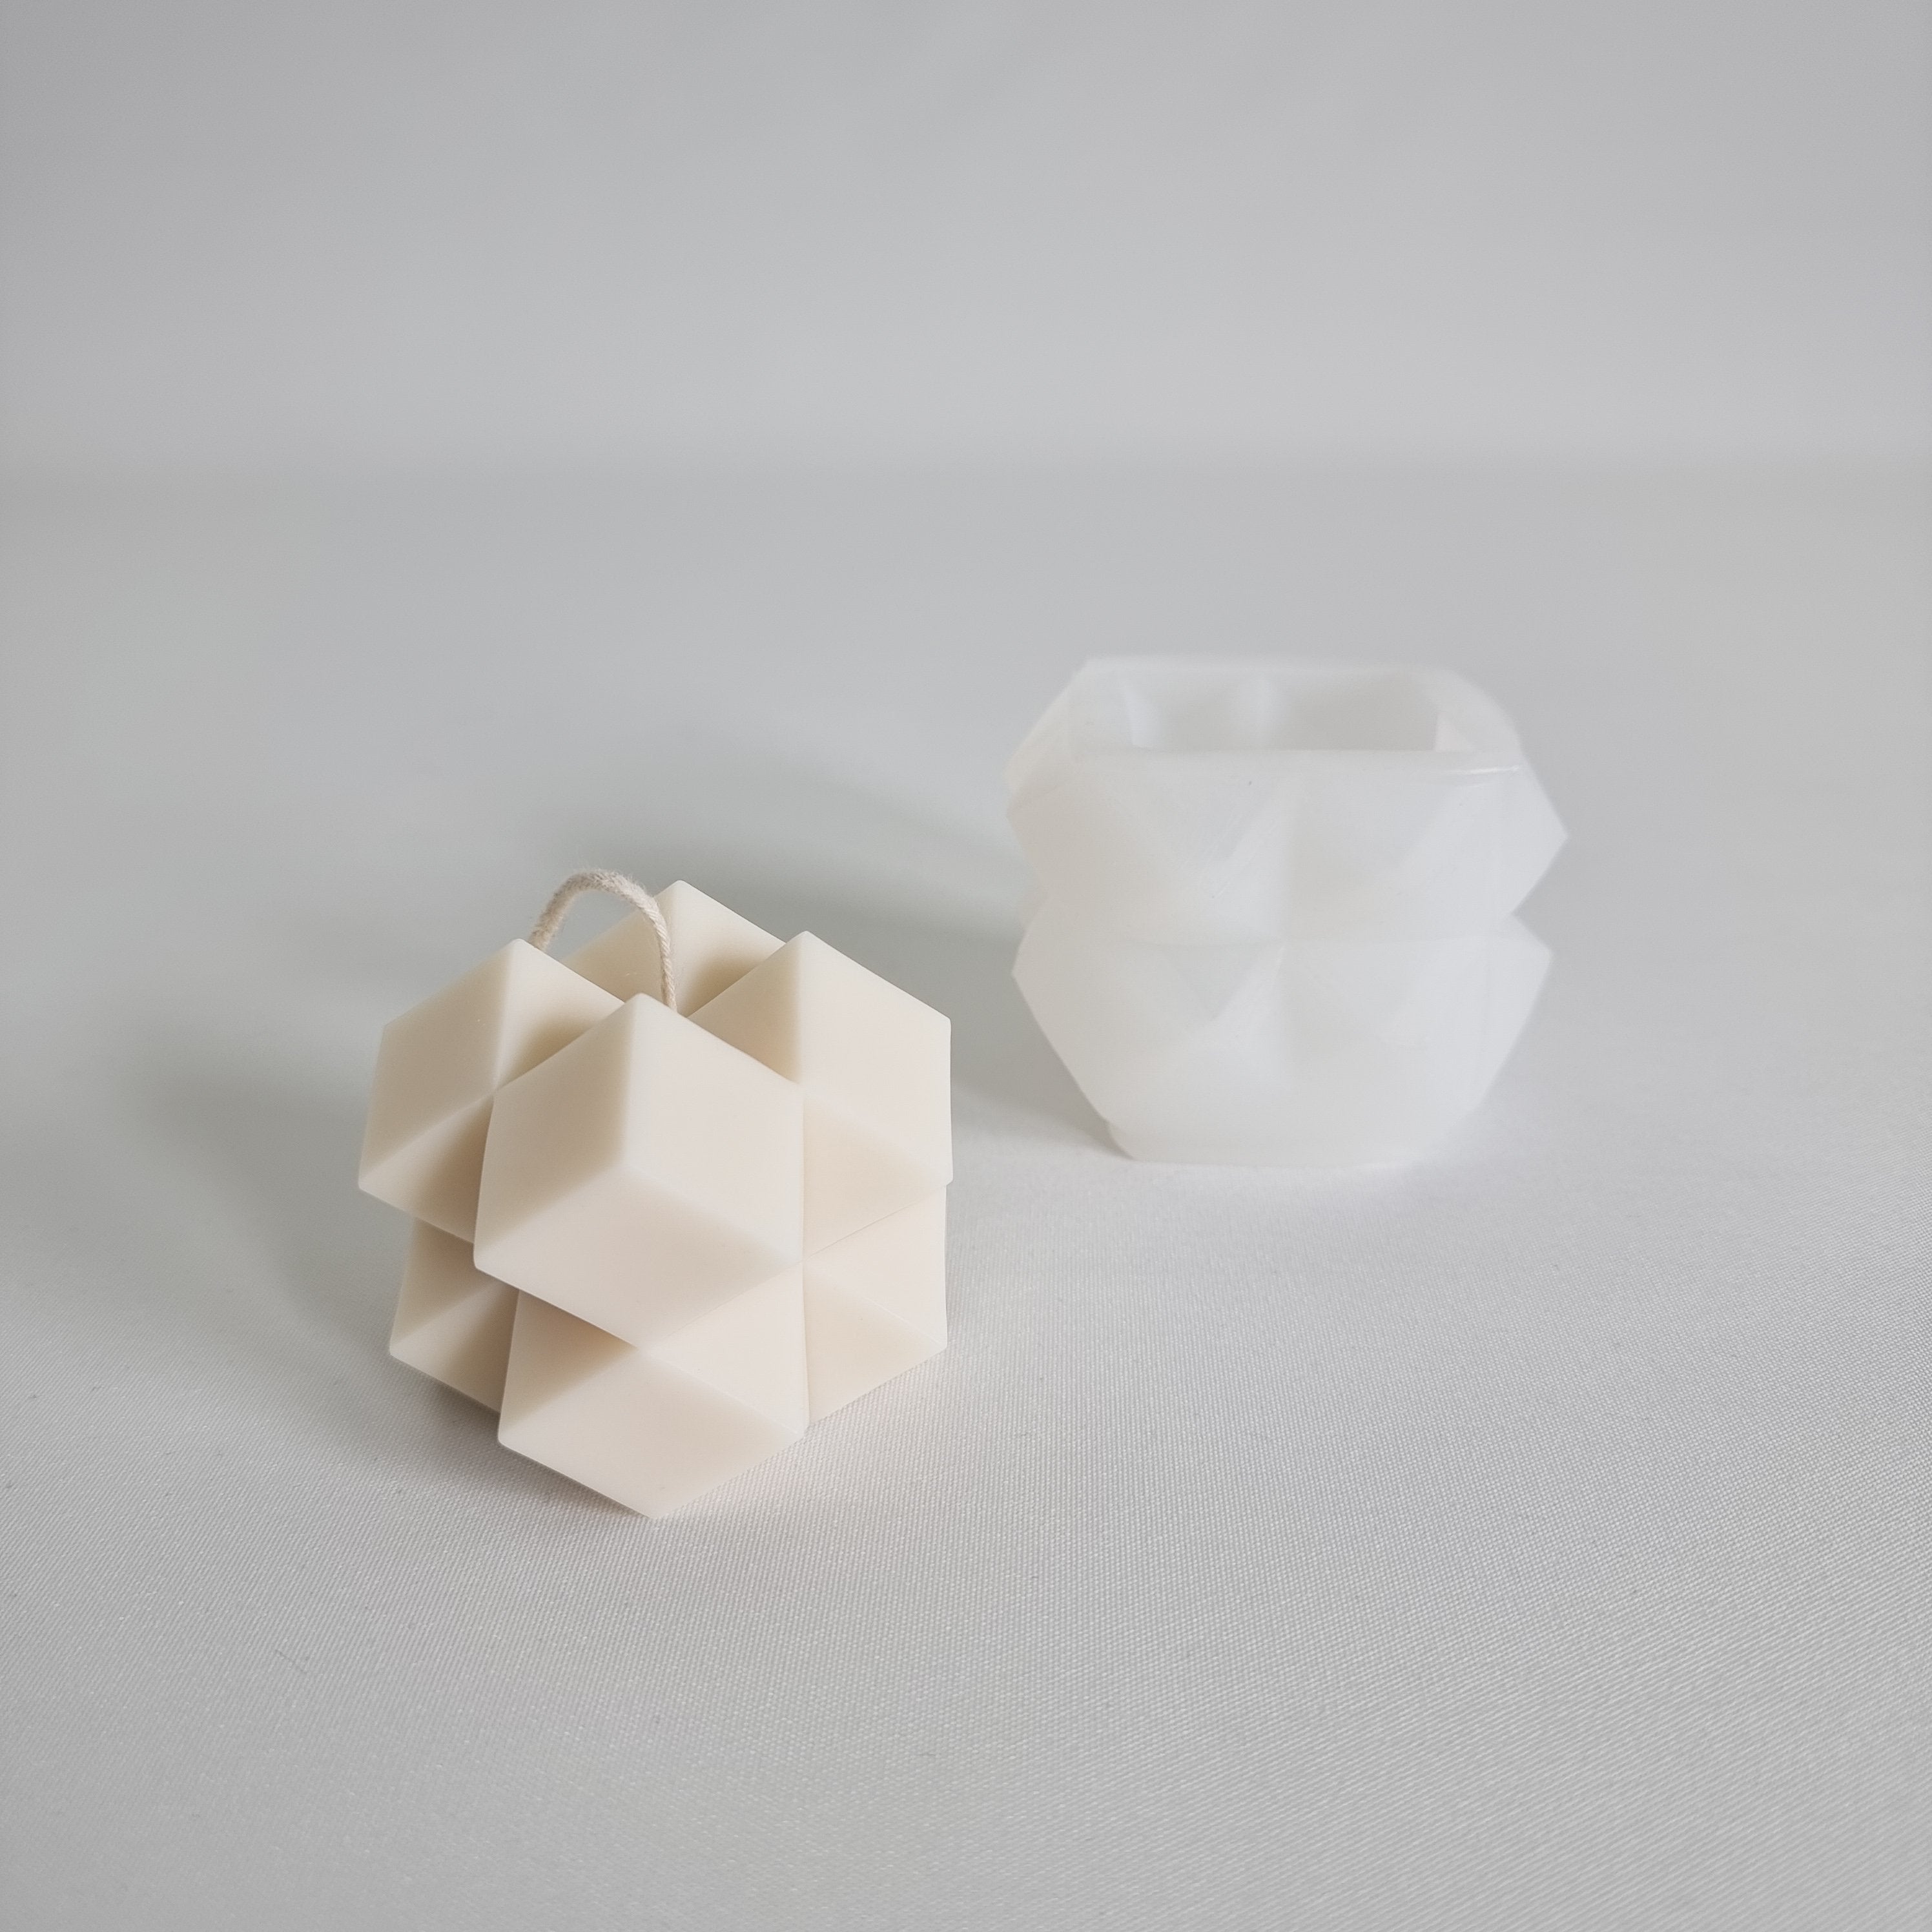 Sharp Cube Candle Moulds 4 - Silicone Mould, Mold for DIY Candles. Created using candle making kit with cotton candle wicks and candle colour chips. Using soy wax for pillar candles. Sold by Myka Candles Moulds Australia